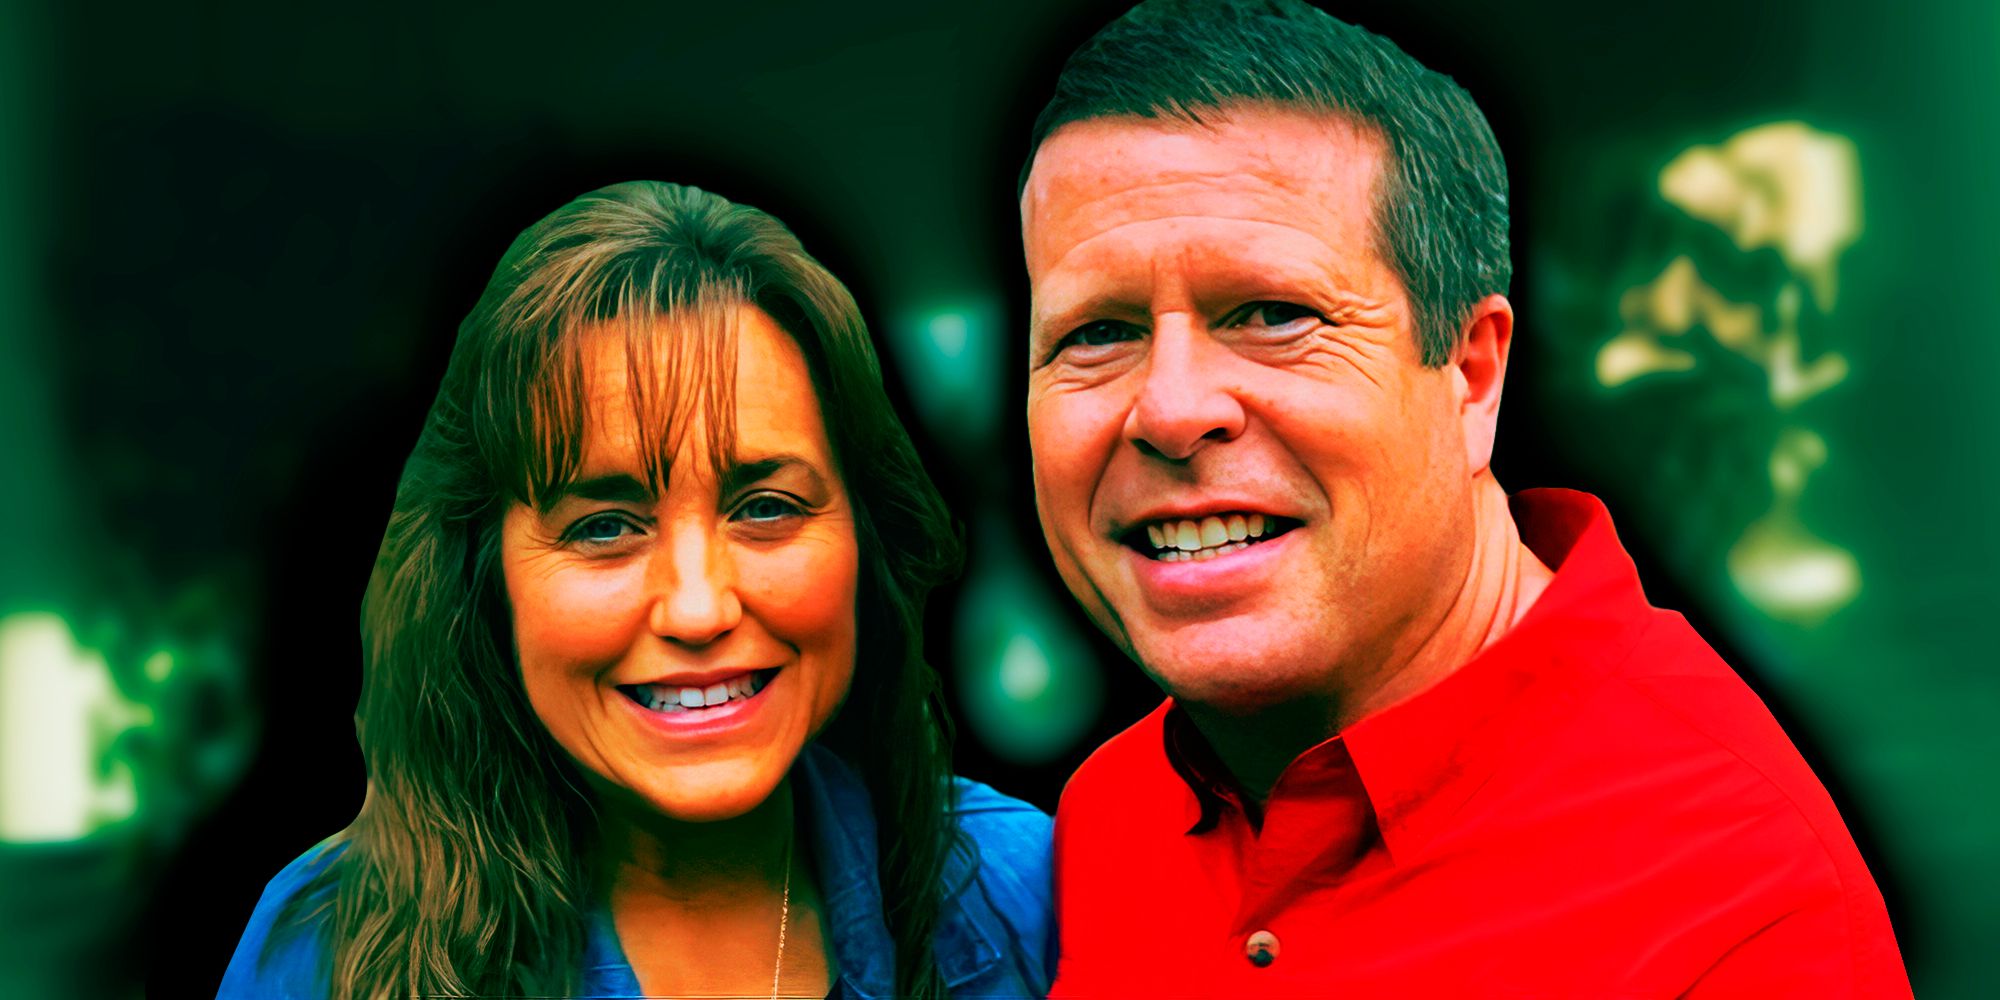 Duggar Circle of relatives Secrets and techniques: 10 Tactics Jim Bob & Michelle Took Merit Of Their Children In the back of The Scenes